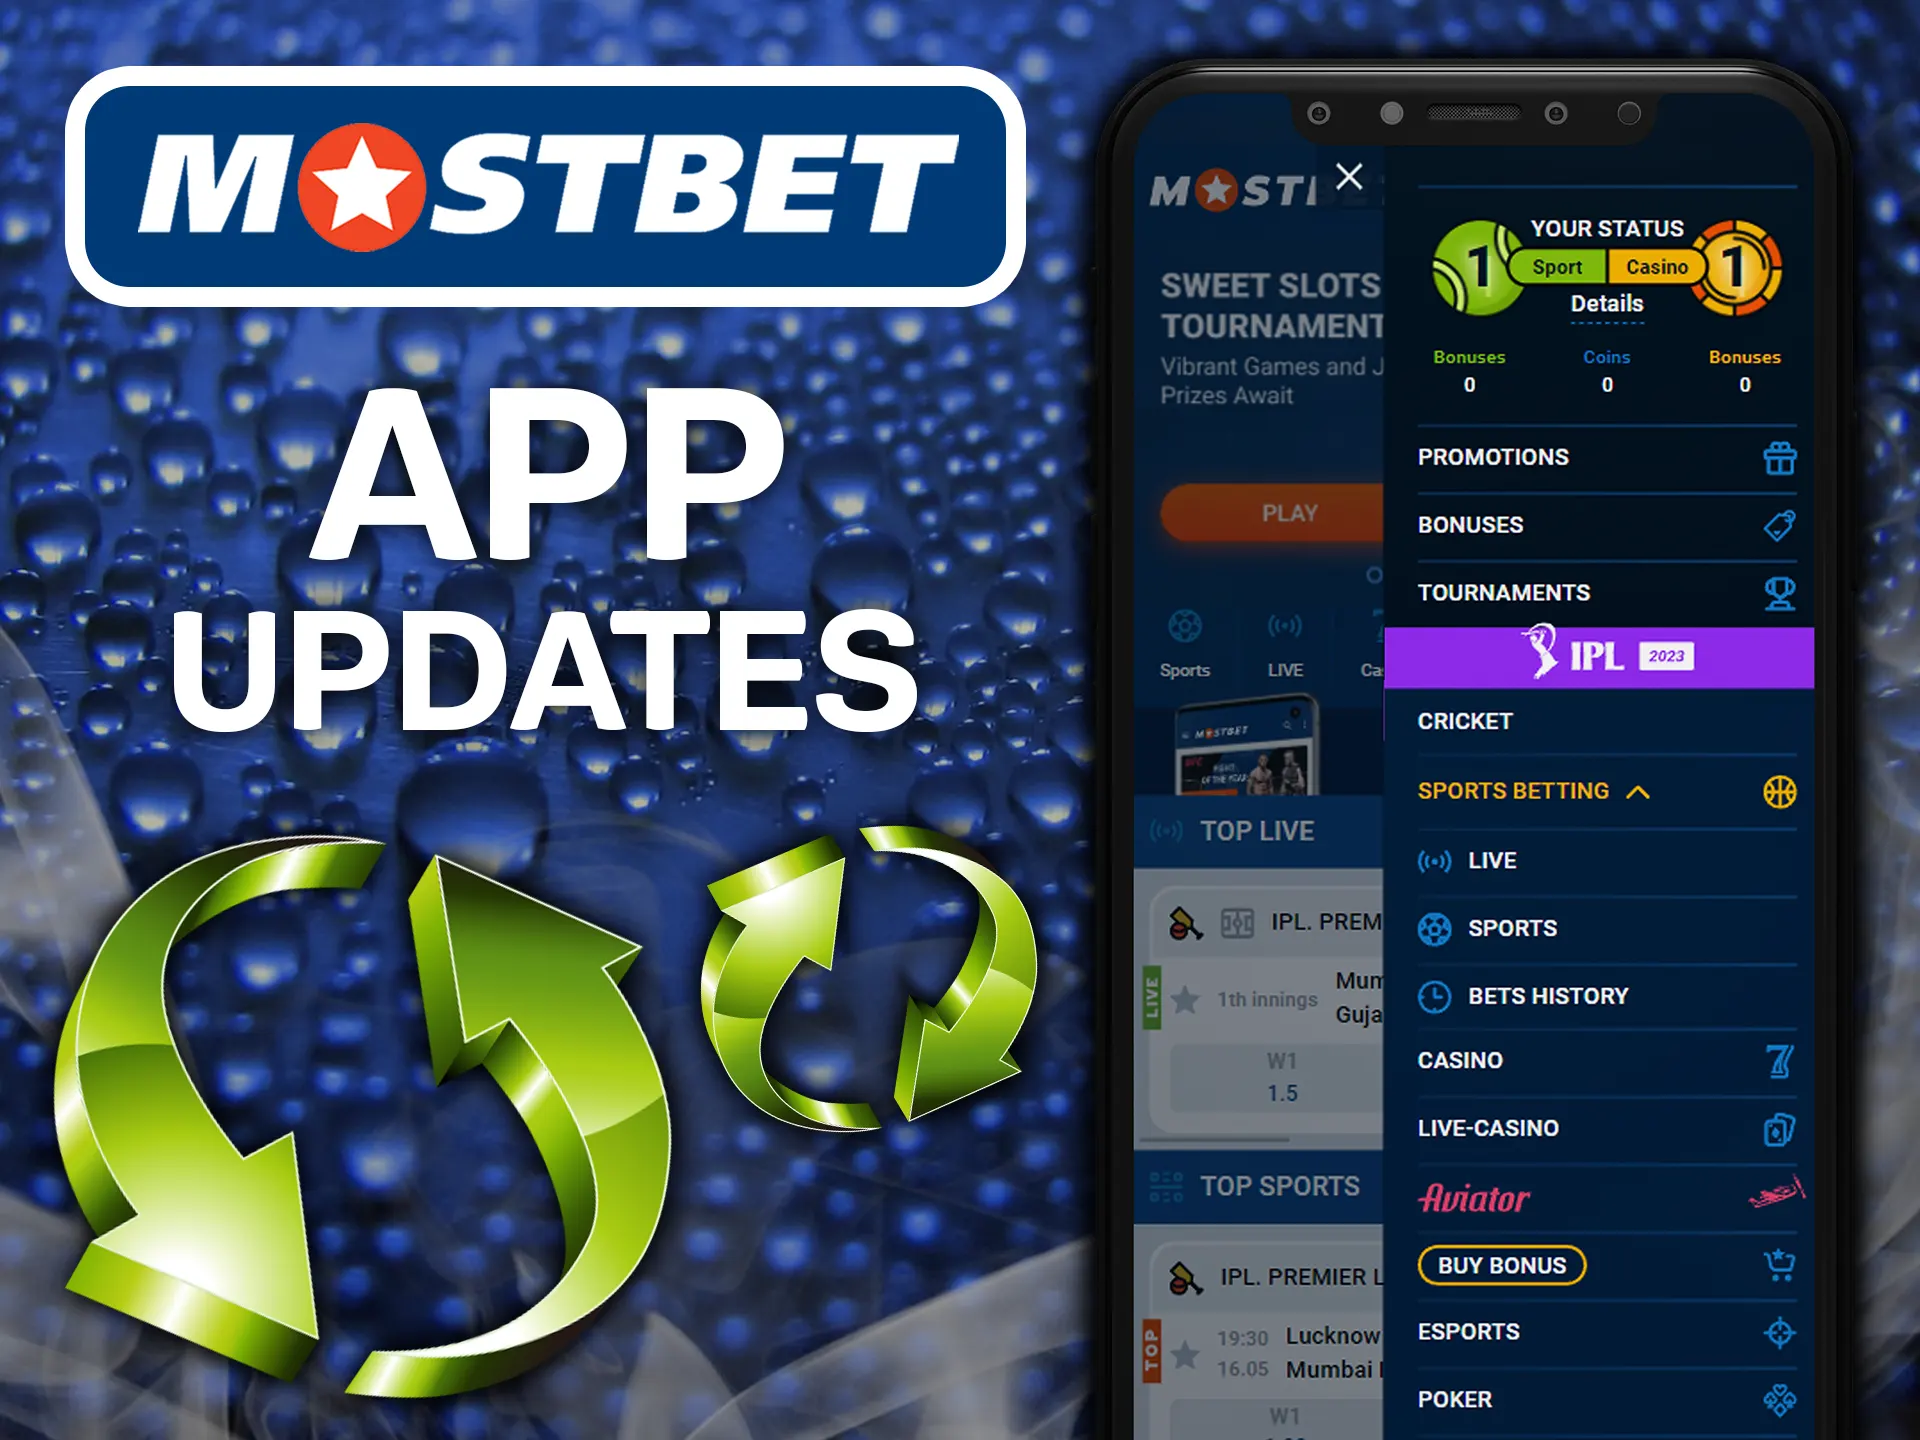 Mostbet app updates automatically after signing in.